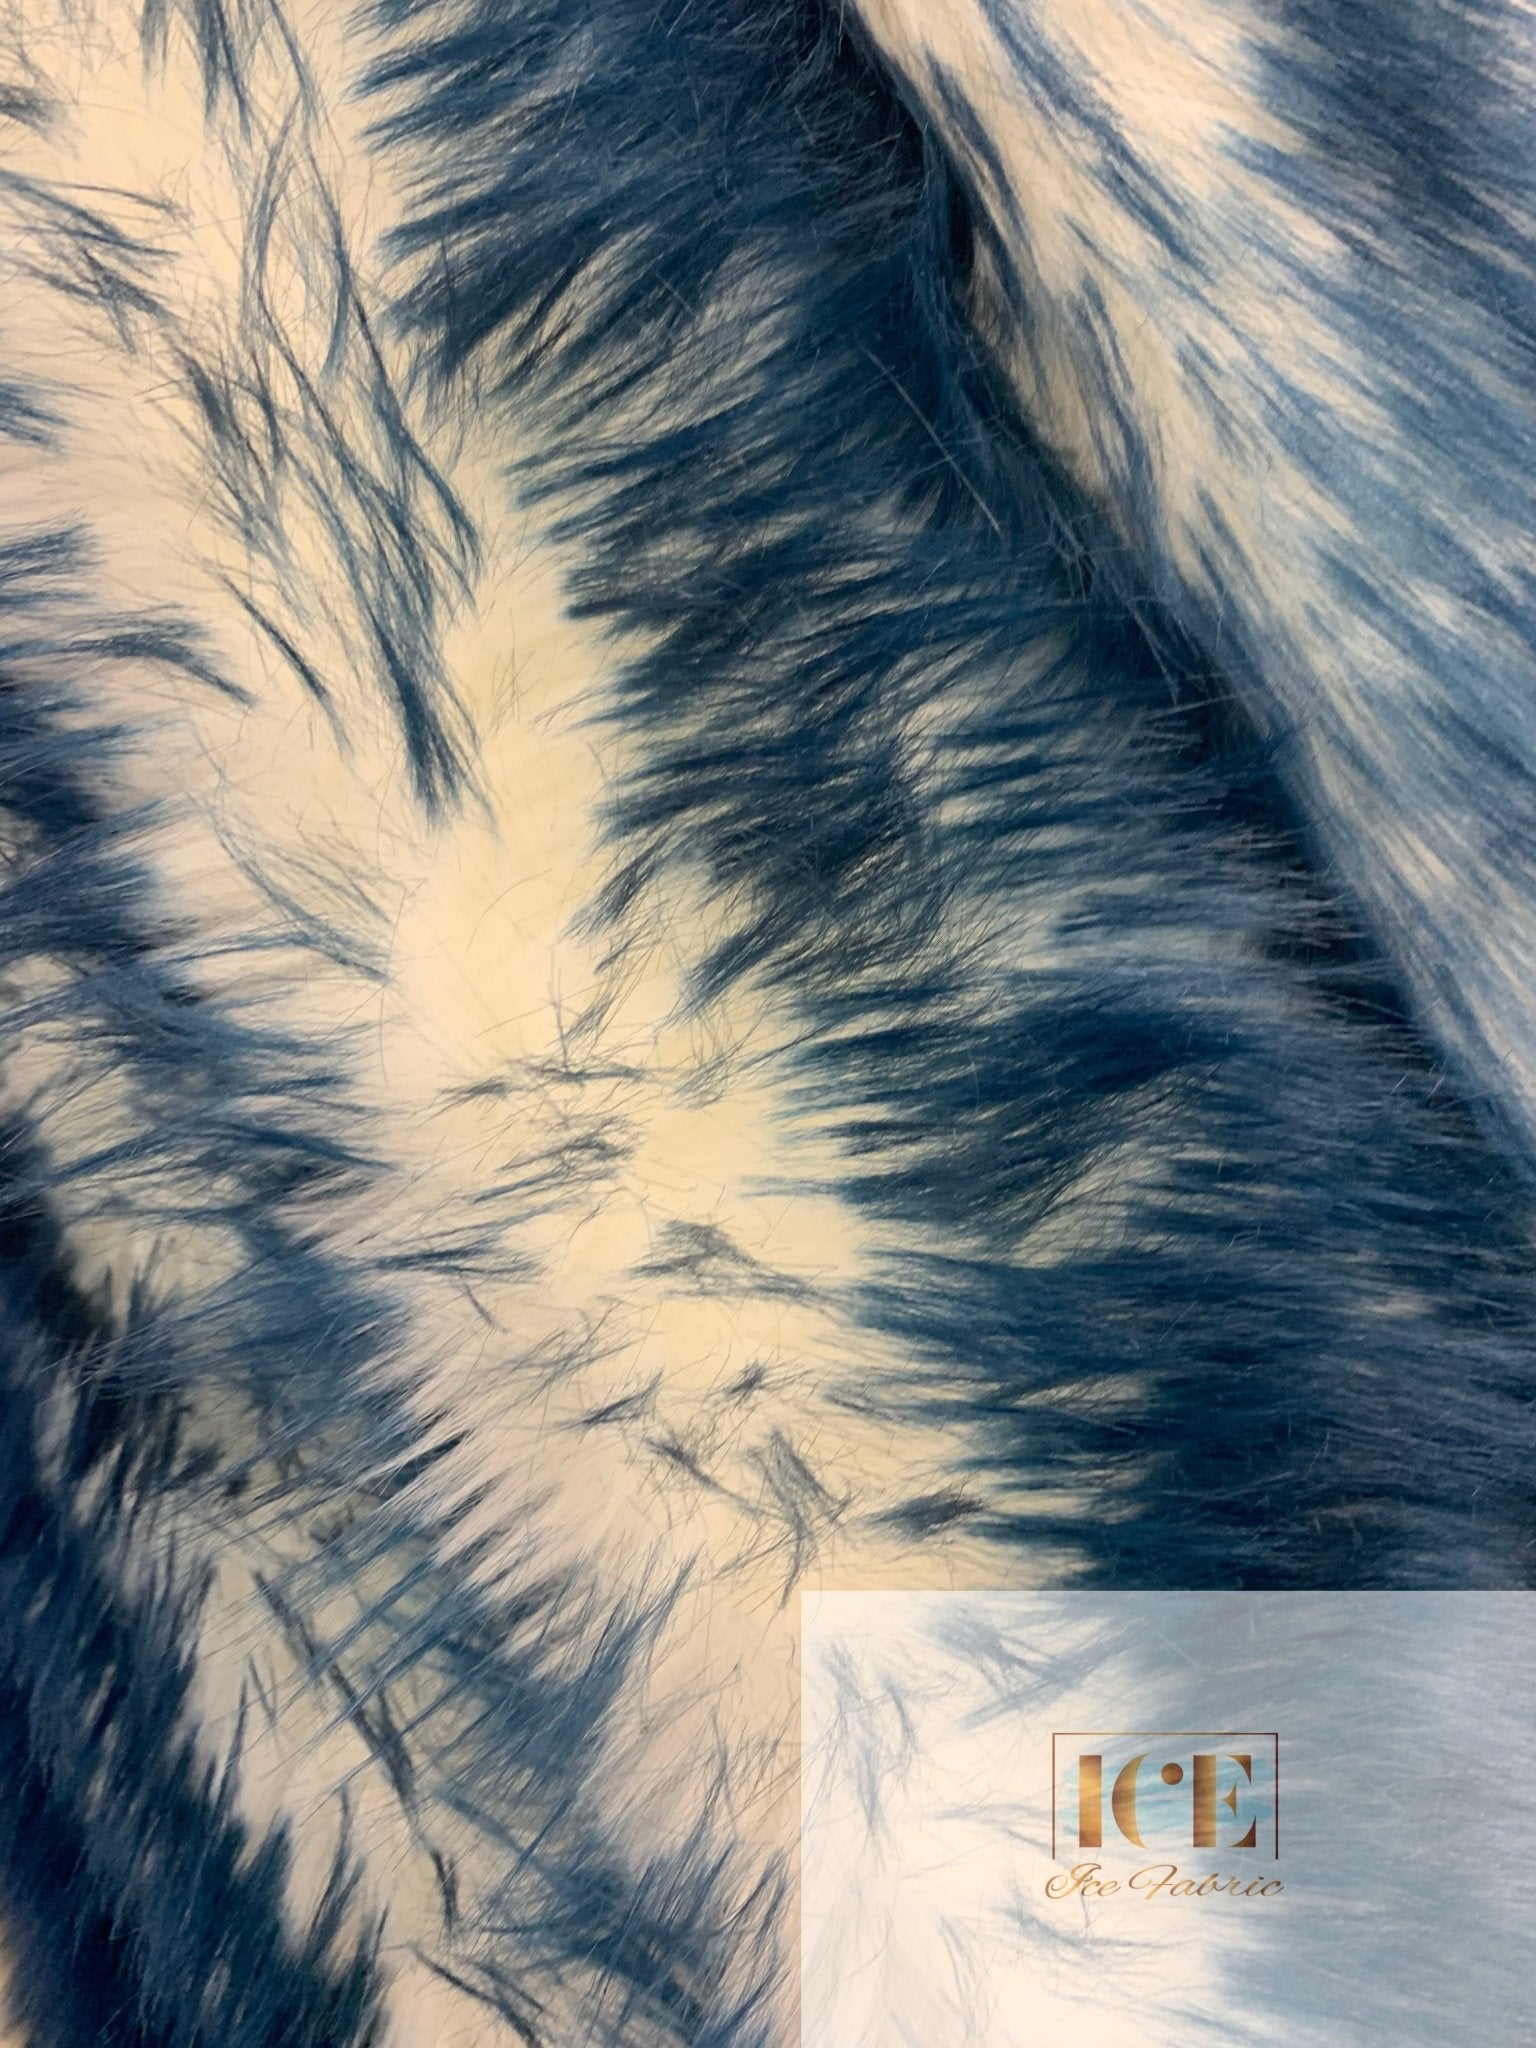 Canadian Fox 2 Tone Shaggy Long Pile Faux Fur Fabric For Blankets, Costumes, Bed SpreadICEFABRICICE FABRICSNavy BlueBy The Yard (60 inches Wide)Canadian Fox 2 Tone Shaggy Long Pile Faux Fur Fabric For Blankets, Costumes, Bed Spread ICEFABRIC Navy Blue